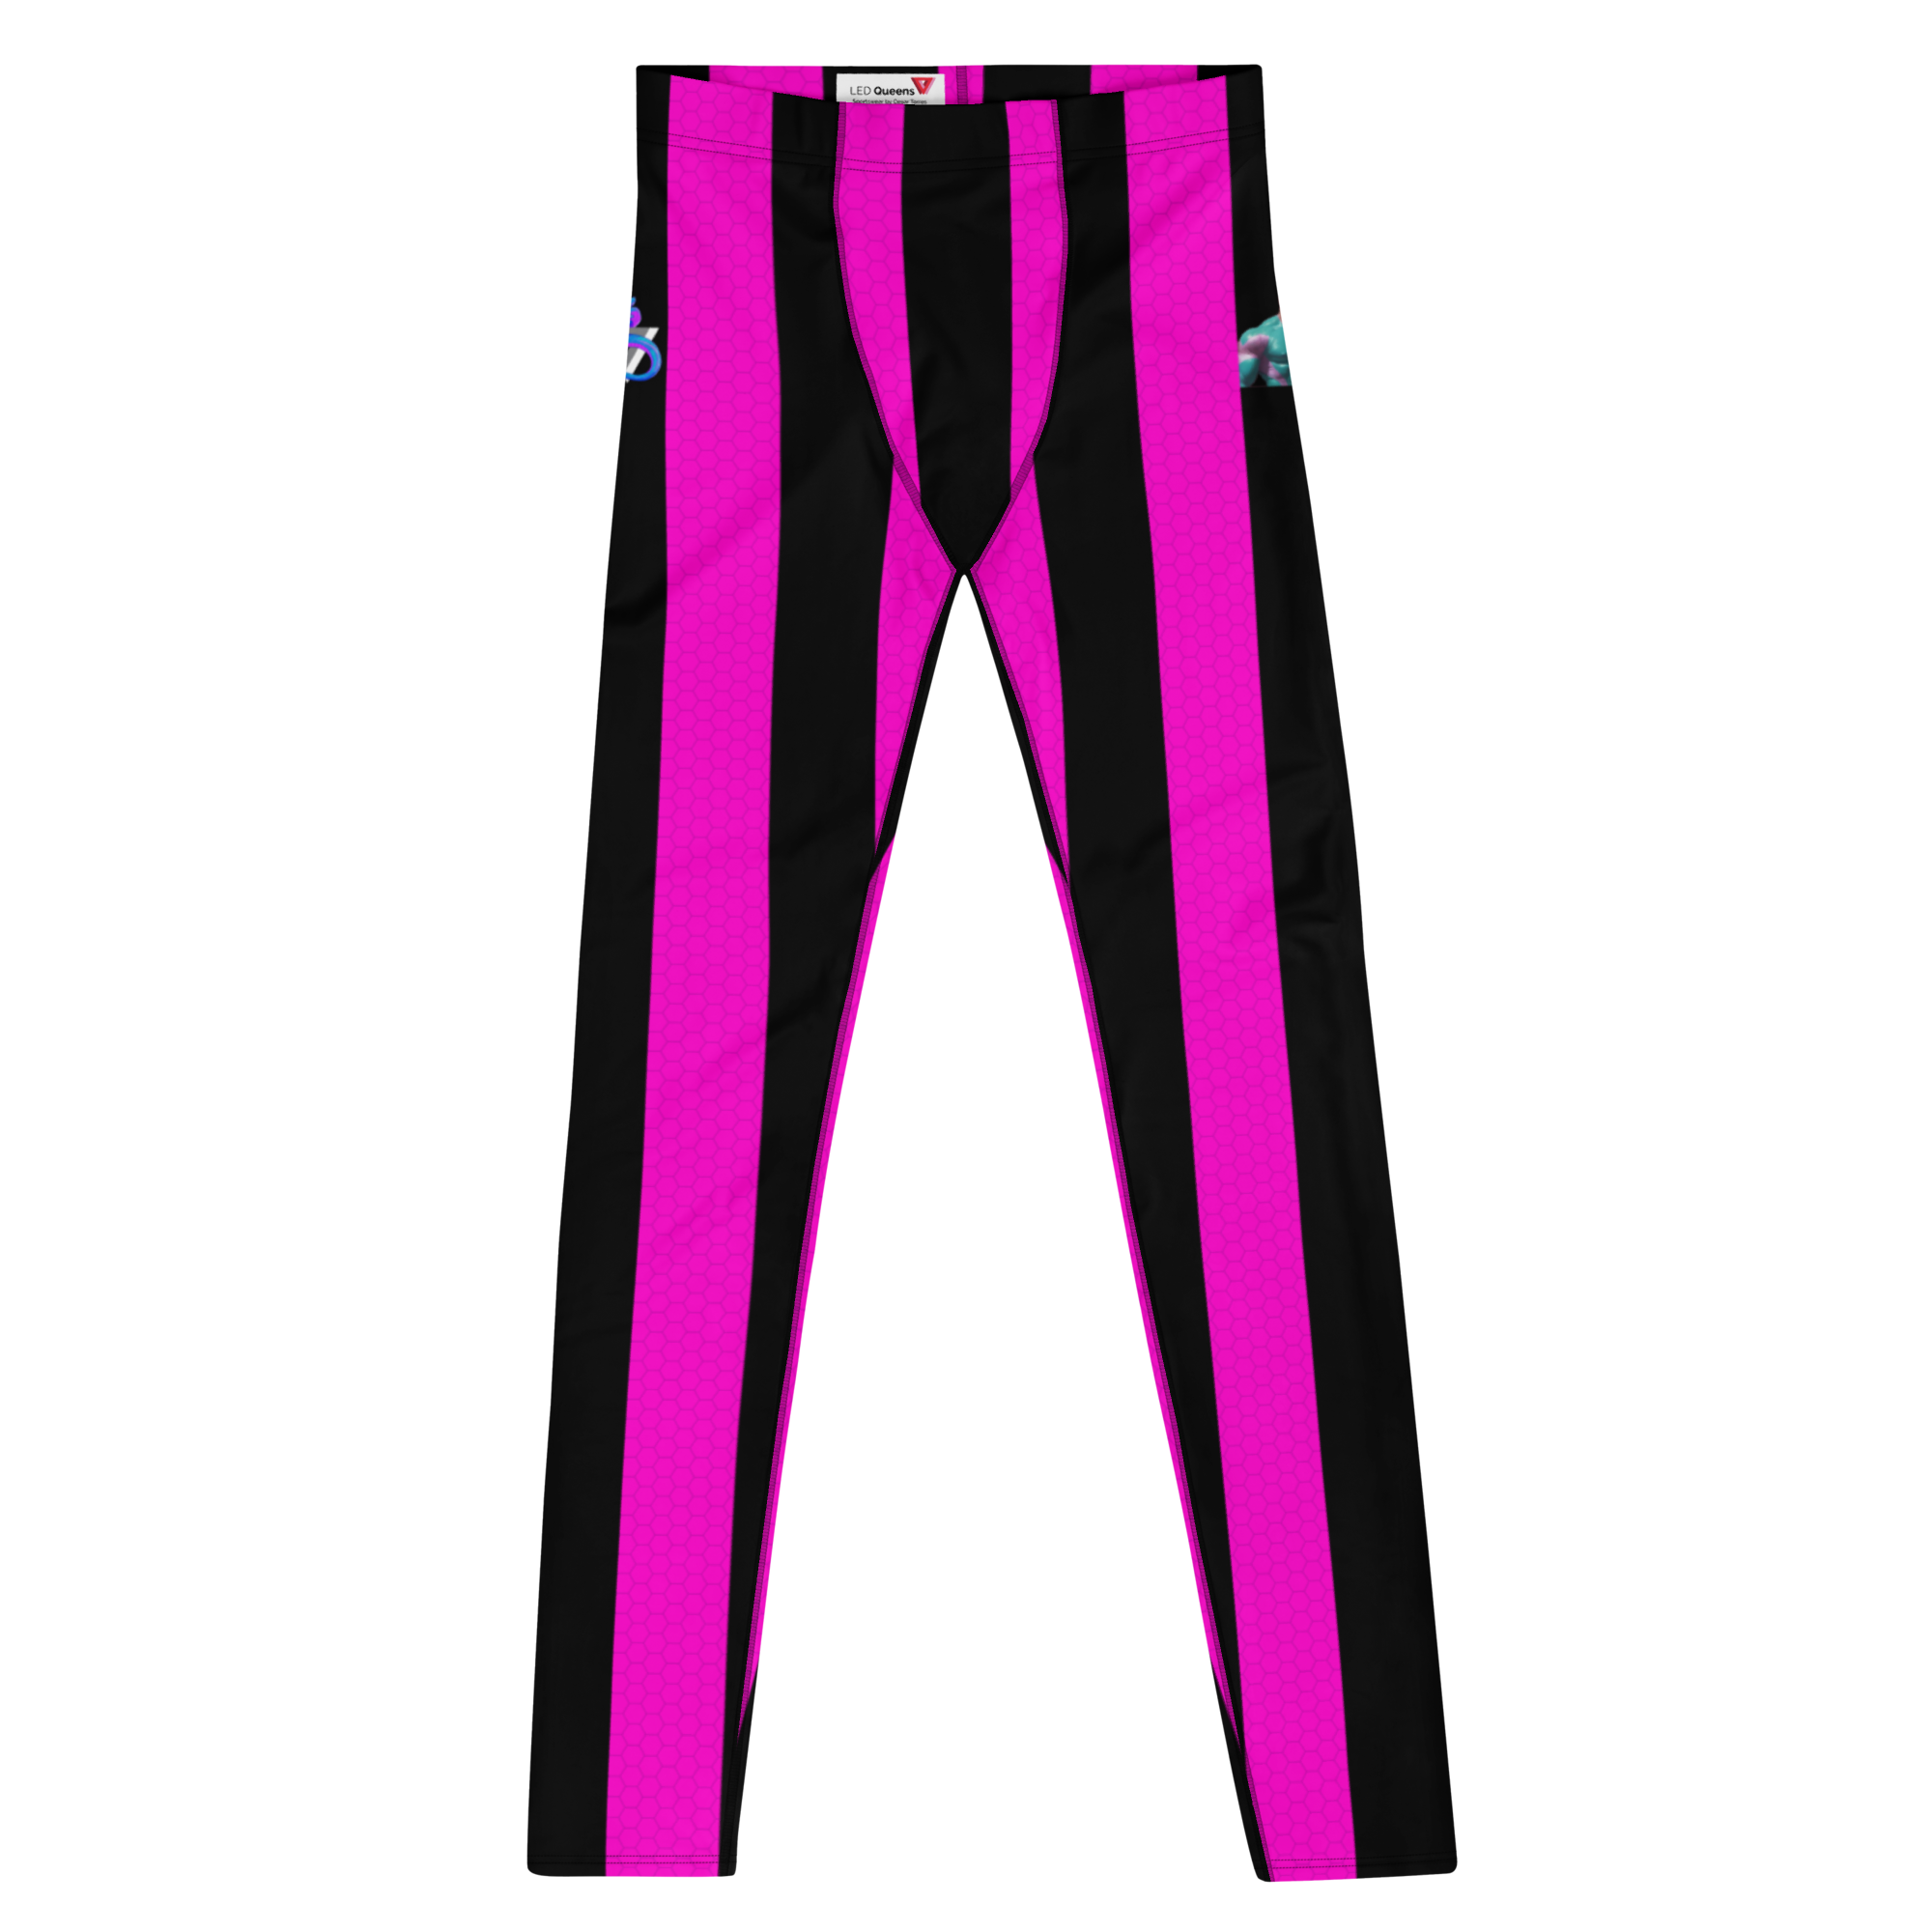 Culturista Plus-Size/High-Waisted Bodybuilding Tights